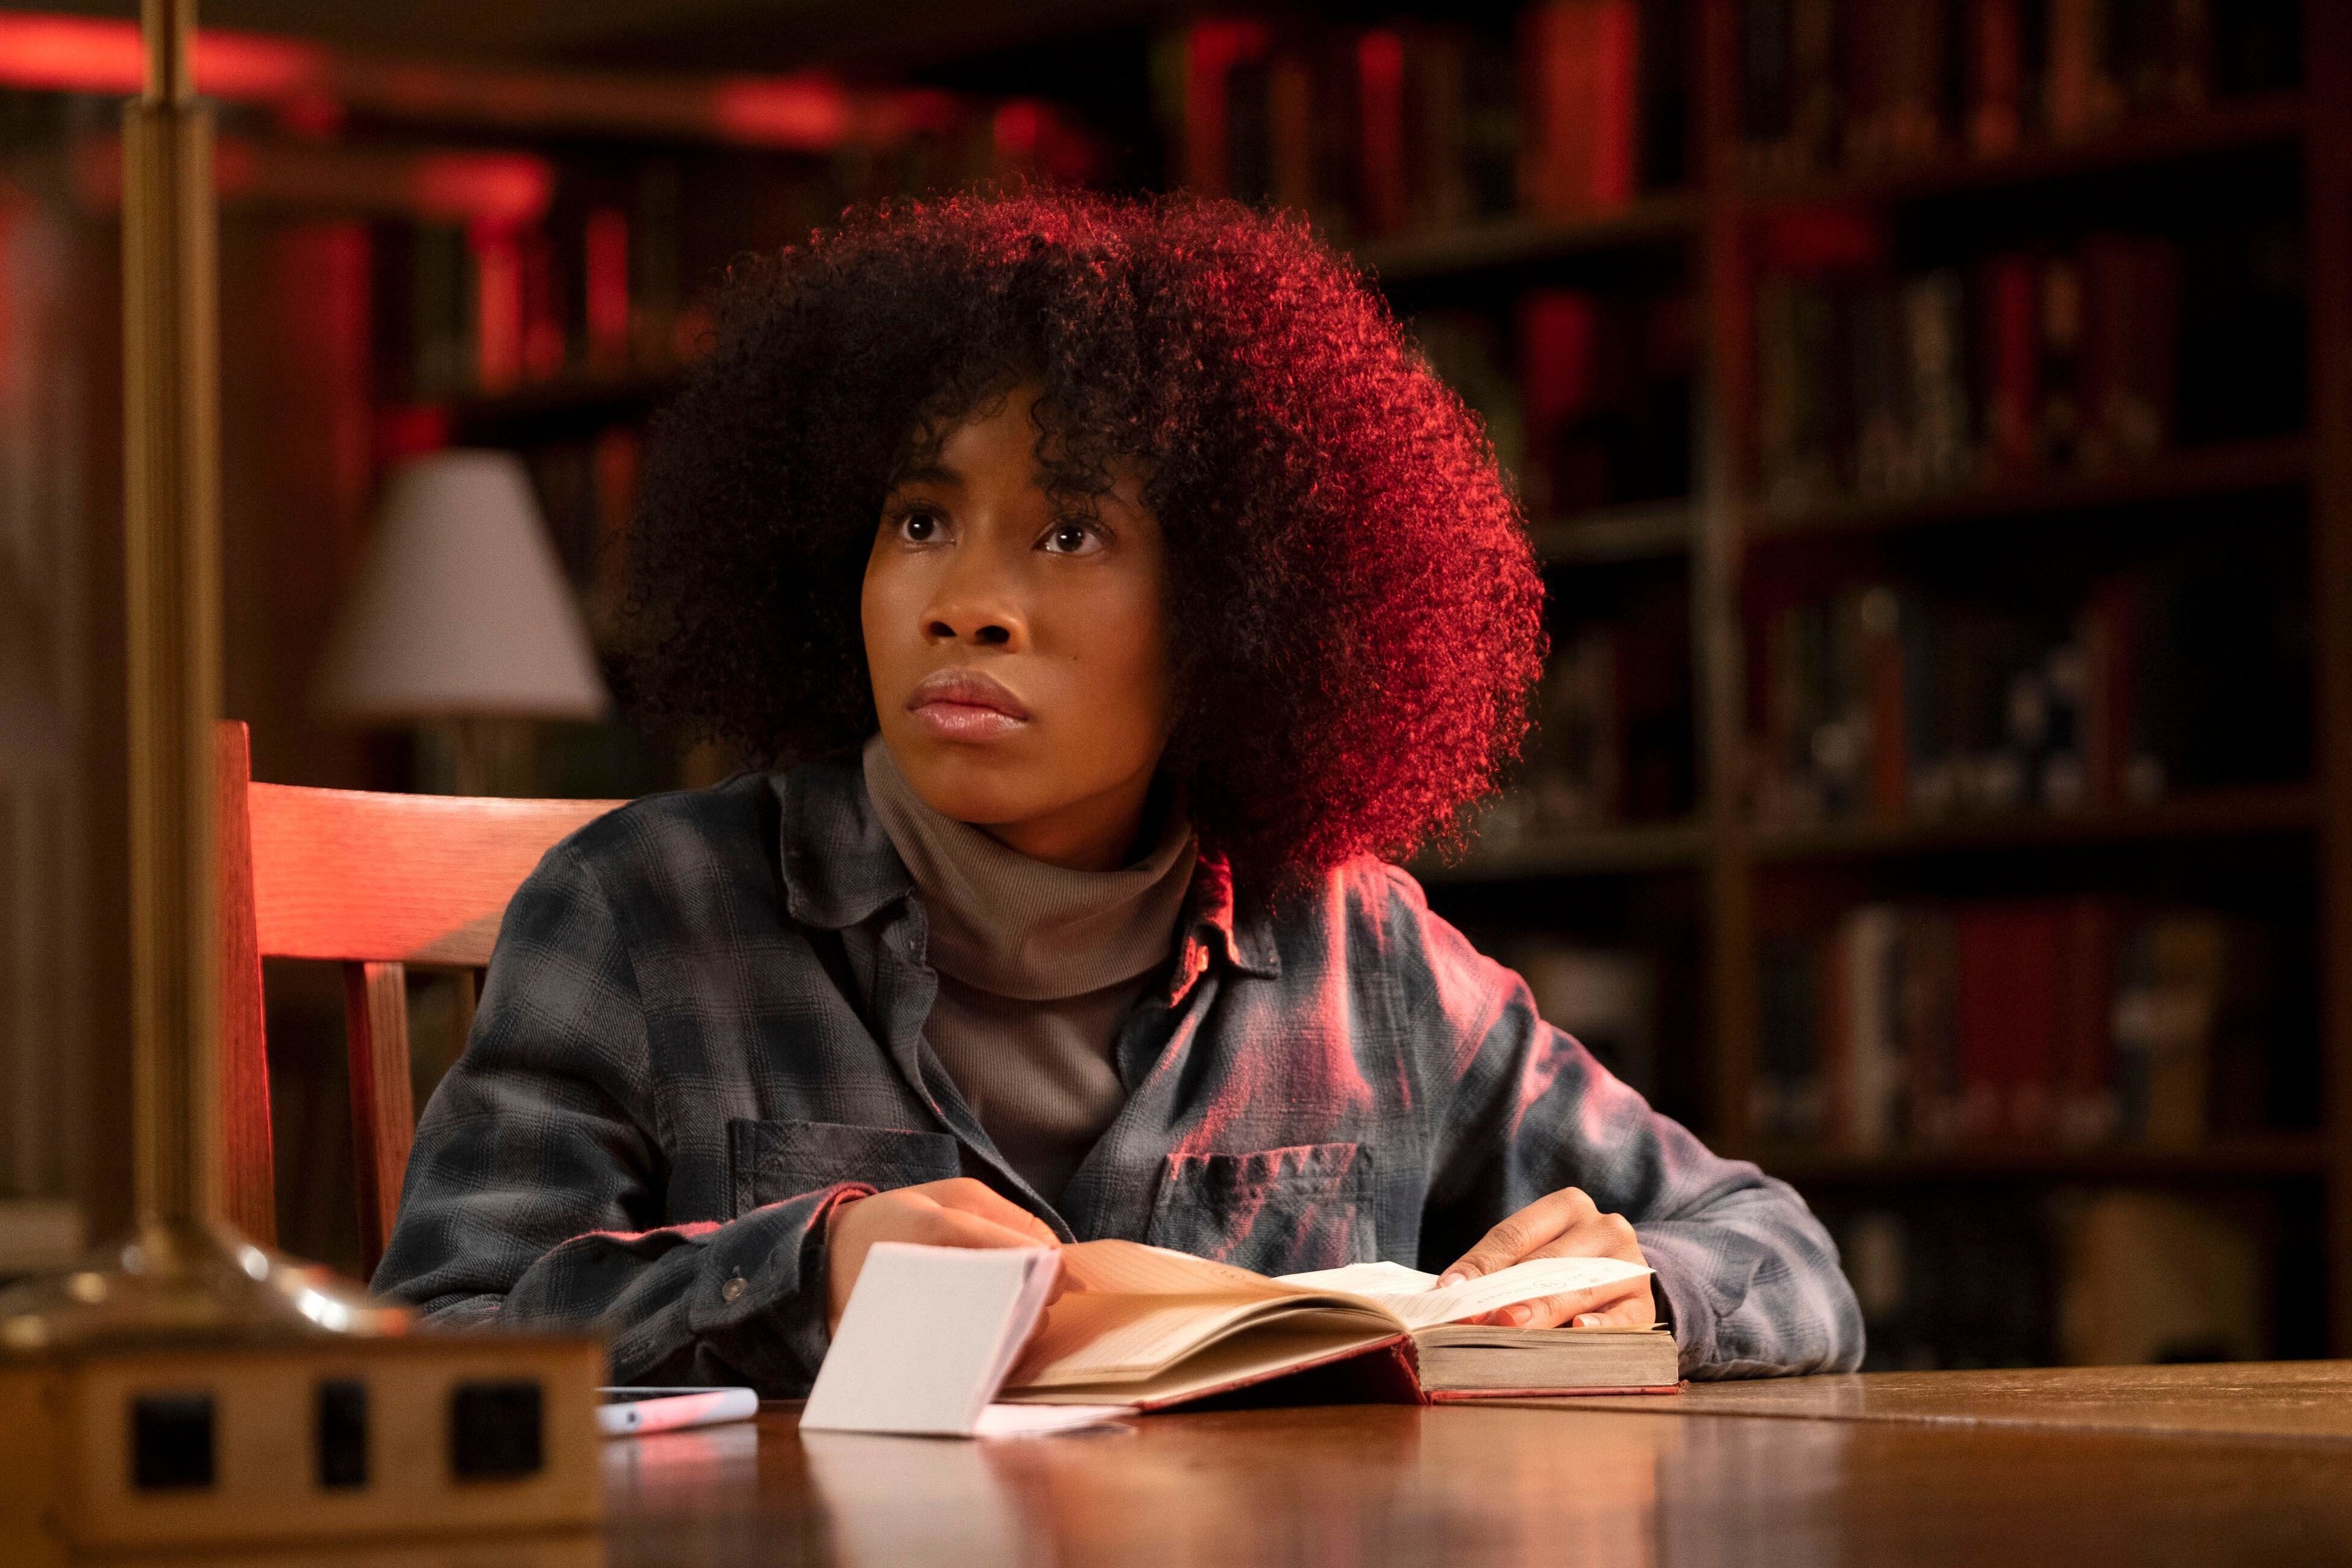 A young African American woman learns something disconcerting at her school’s library in “Master”